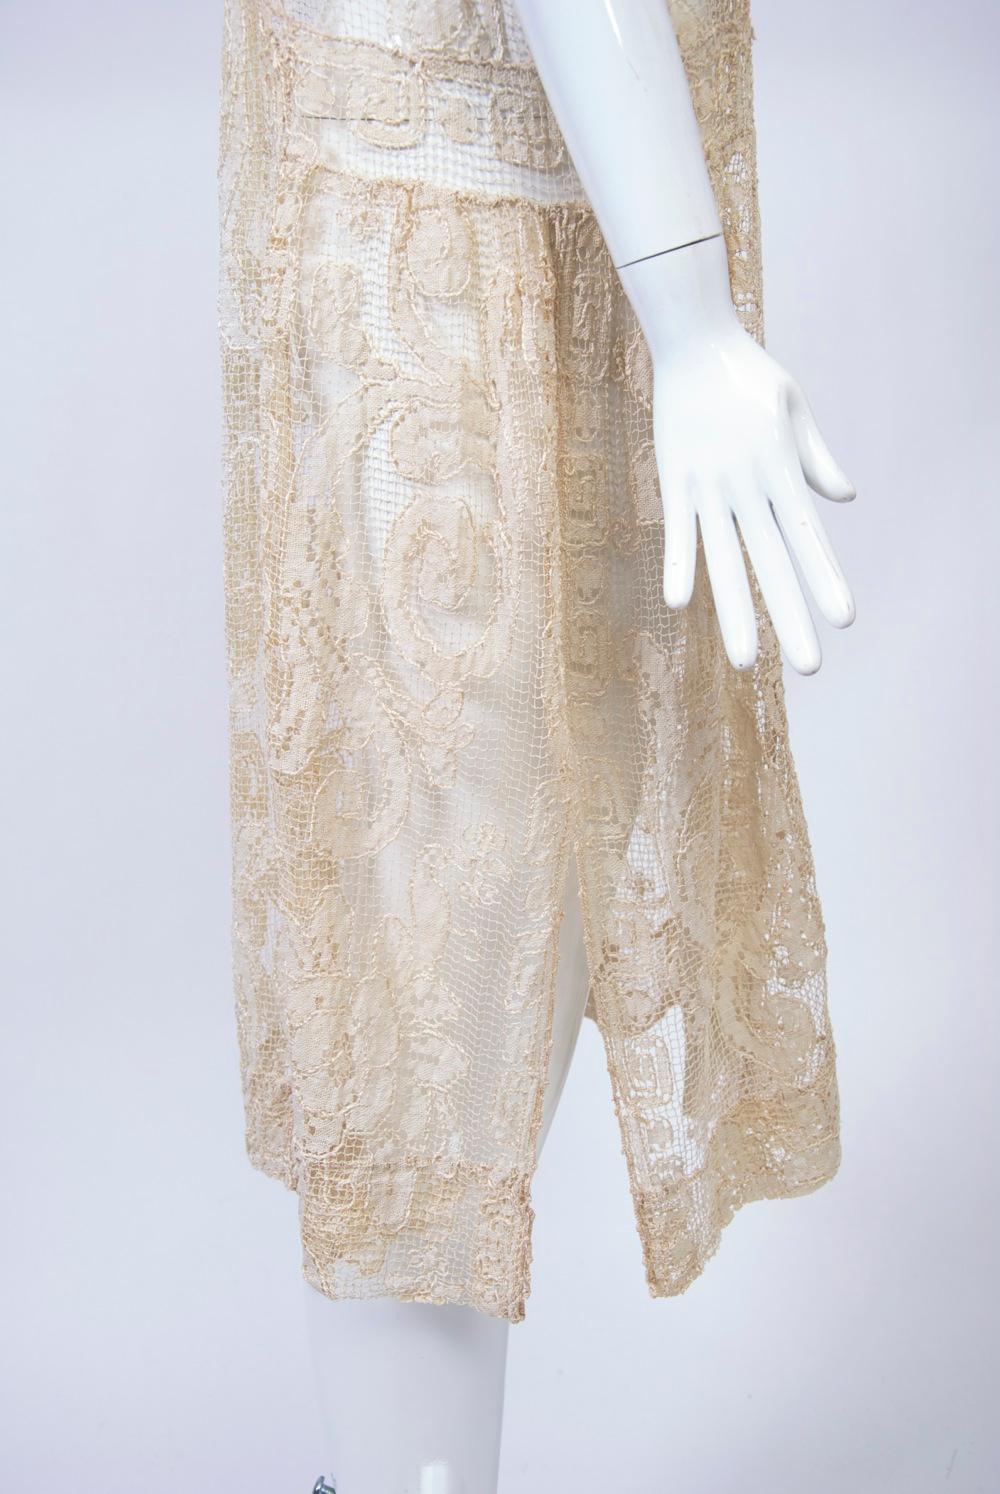 1930s Beige Lace Dress In Good Condition For Sale In Alford, MA